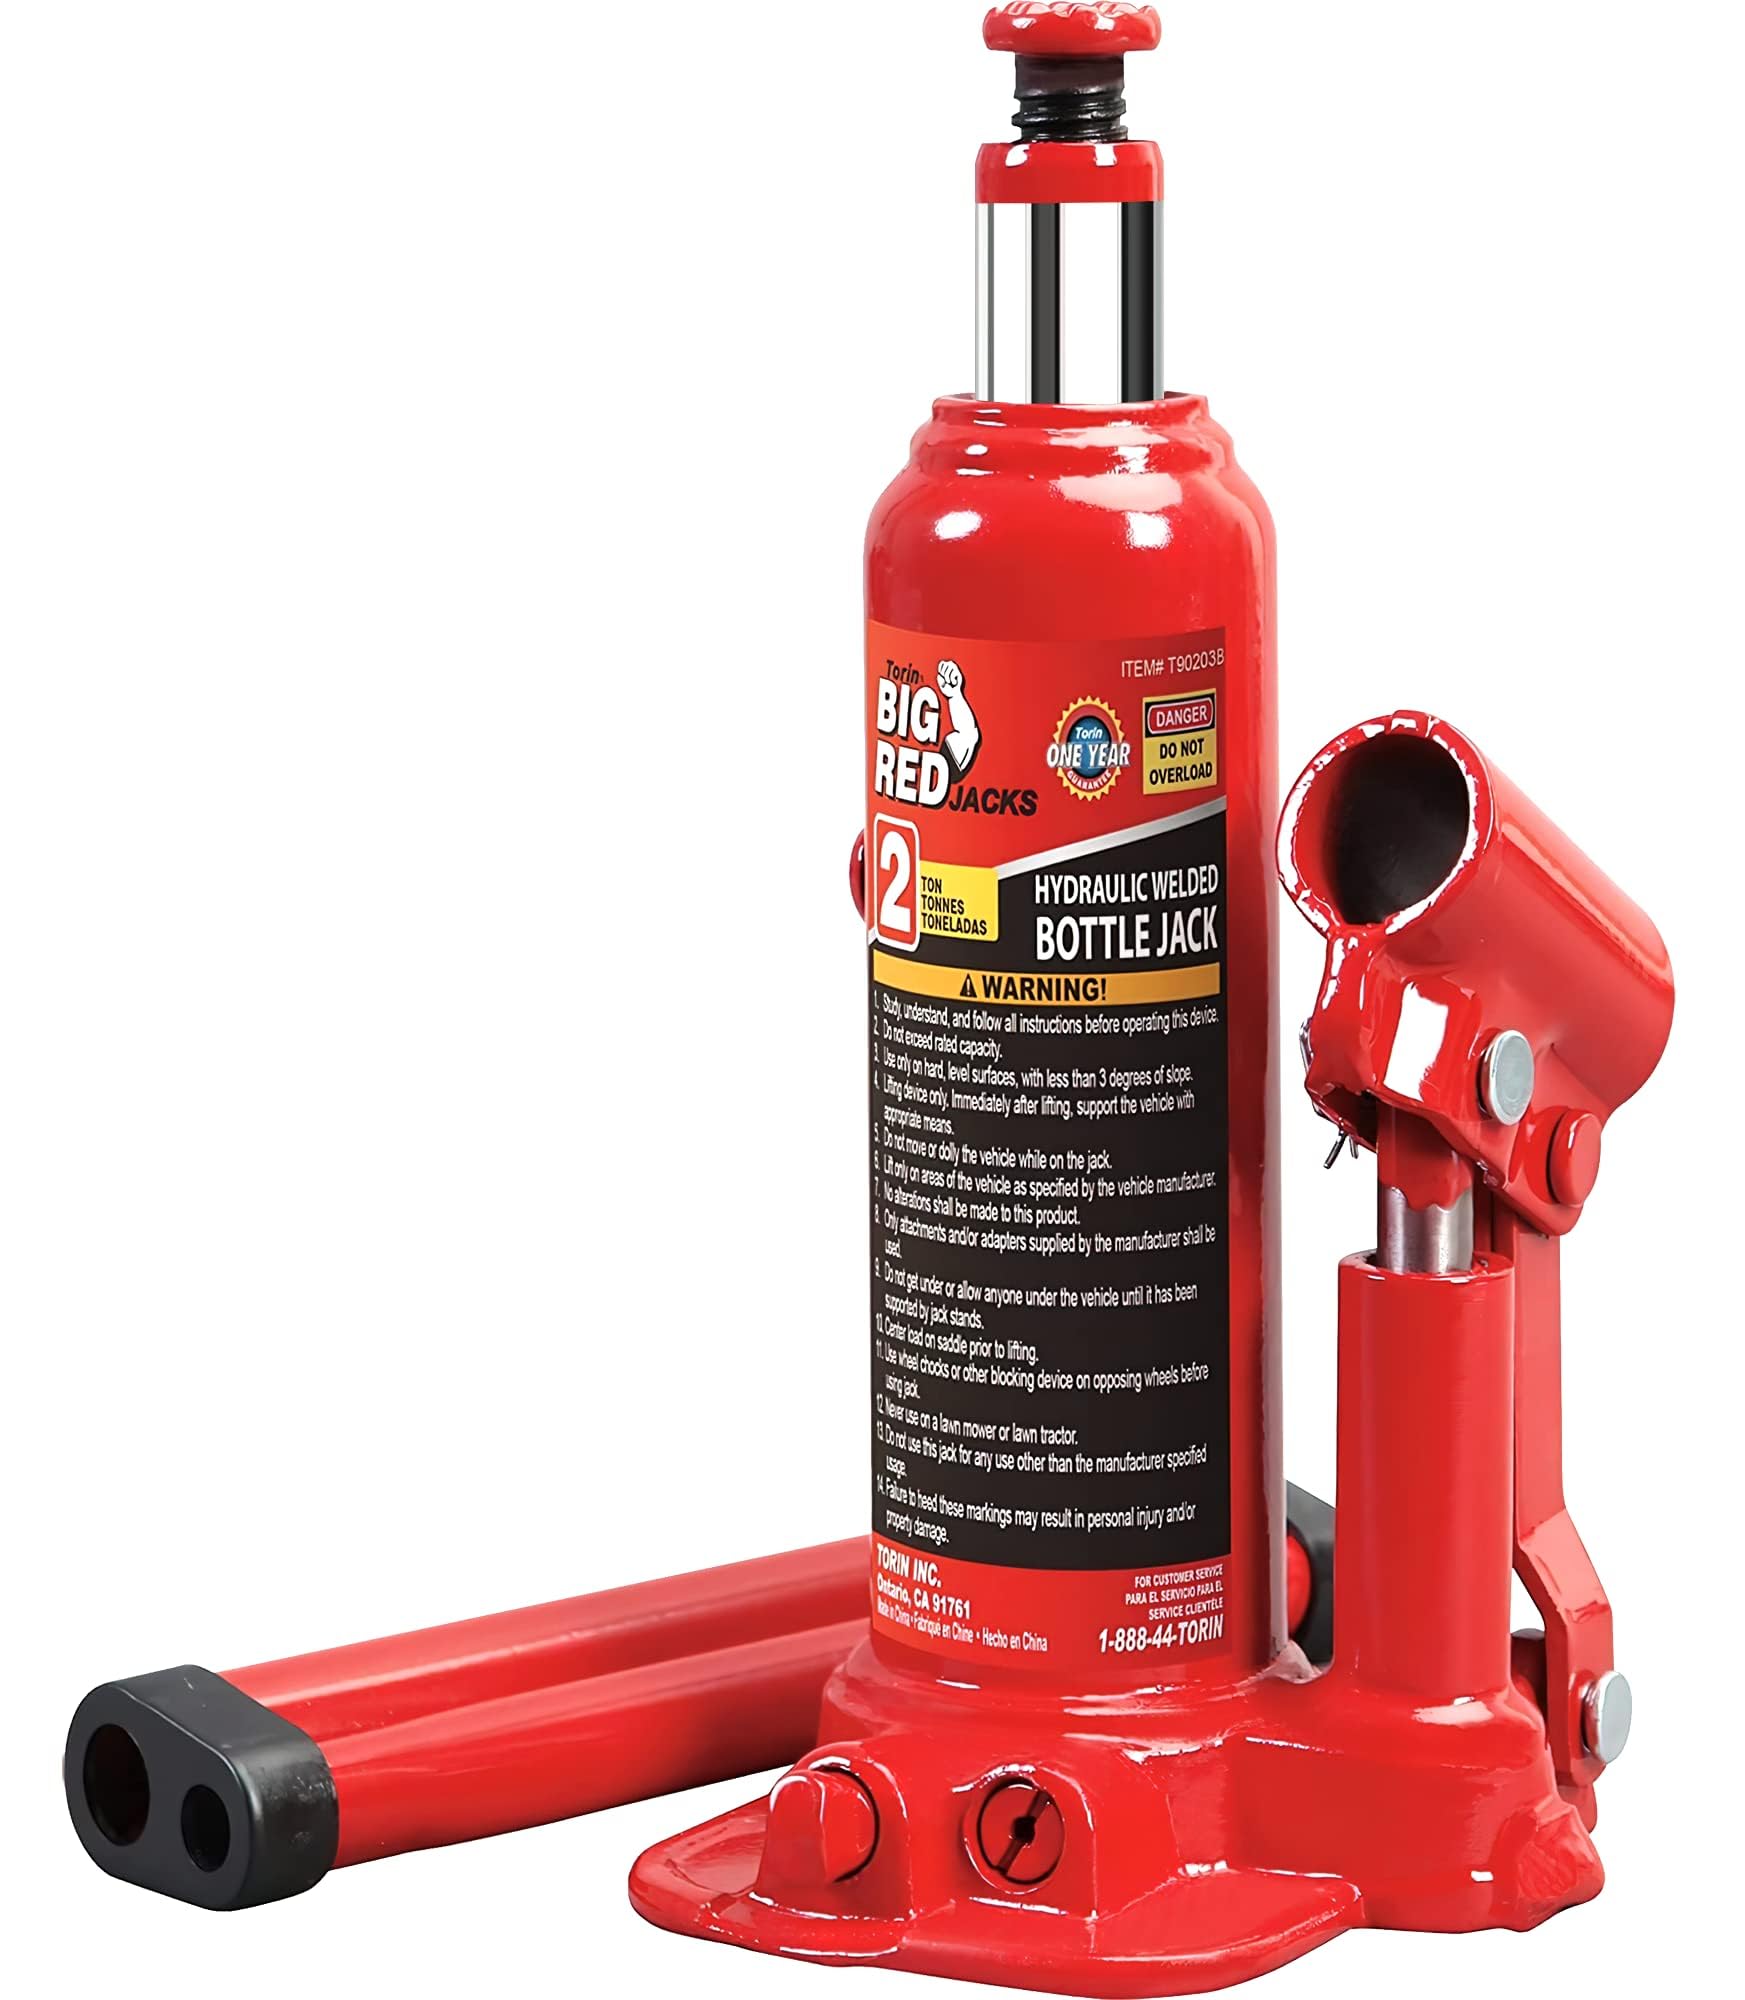 BIG RED T90203B-1 Torin Hydraulic Welded Bottle Jack, 2 Ton (4,000 lb.) Capacity, Red